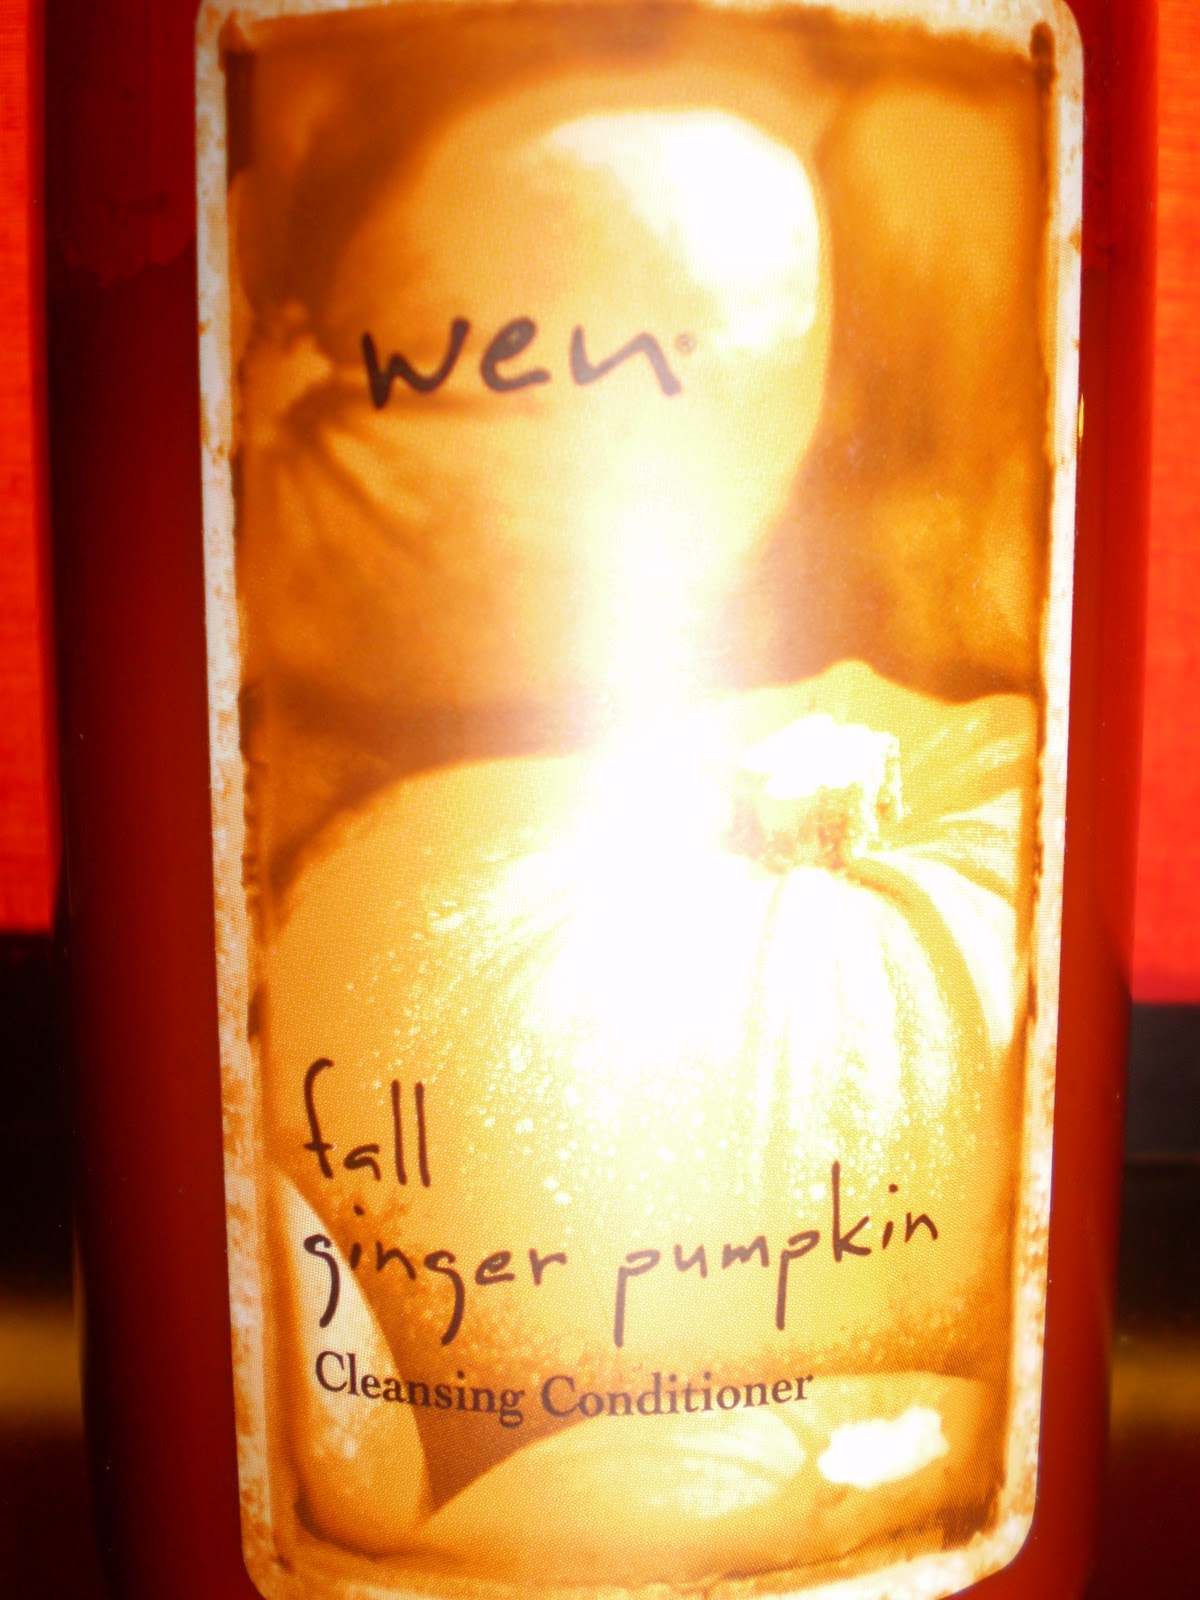 How's My Hair?: Review: Wen Fall Ginger Pumpkin Cleansing Conditioner